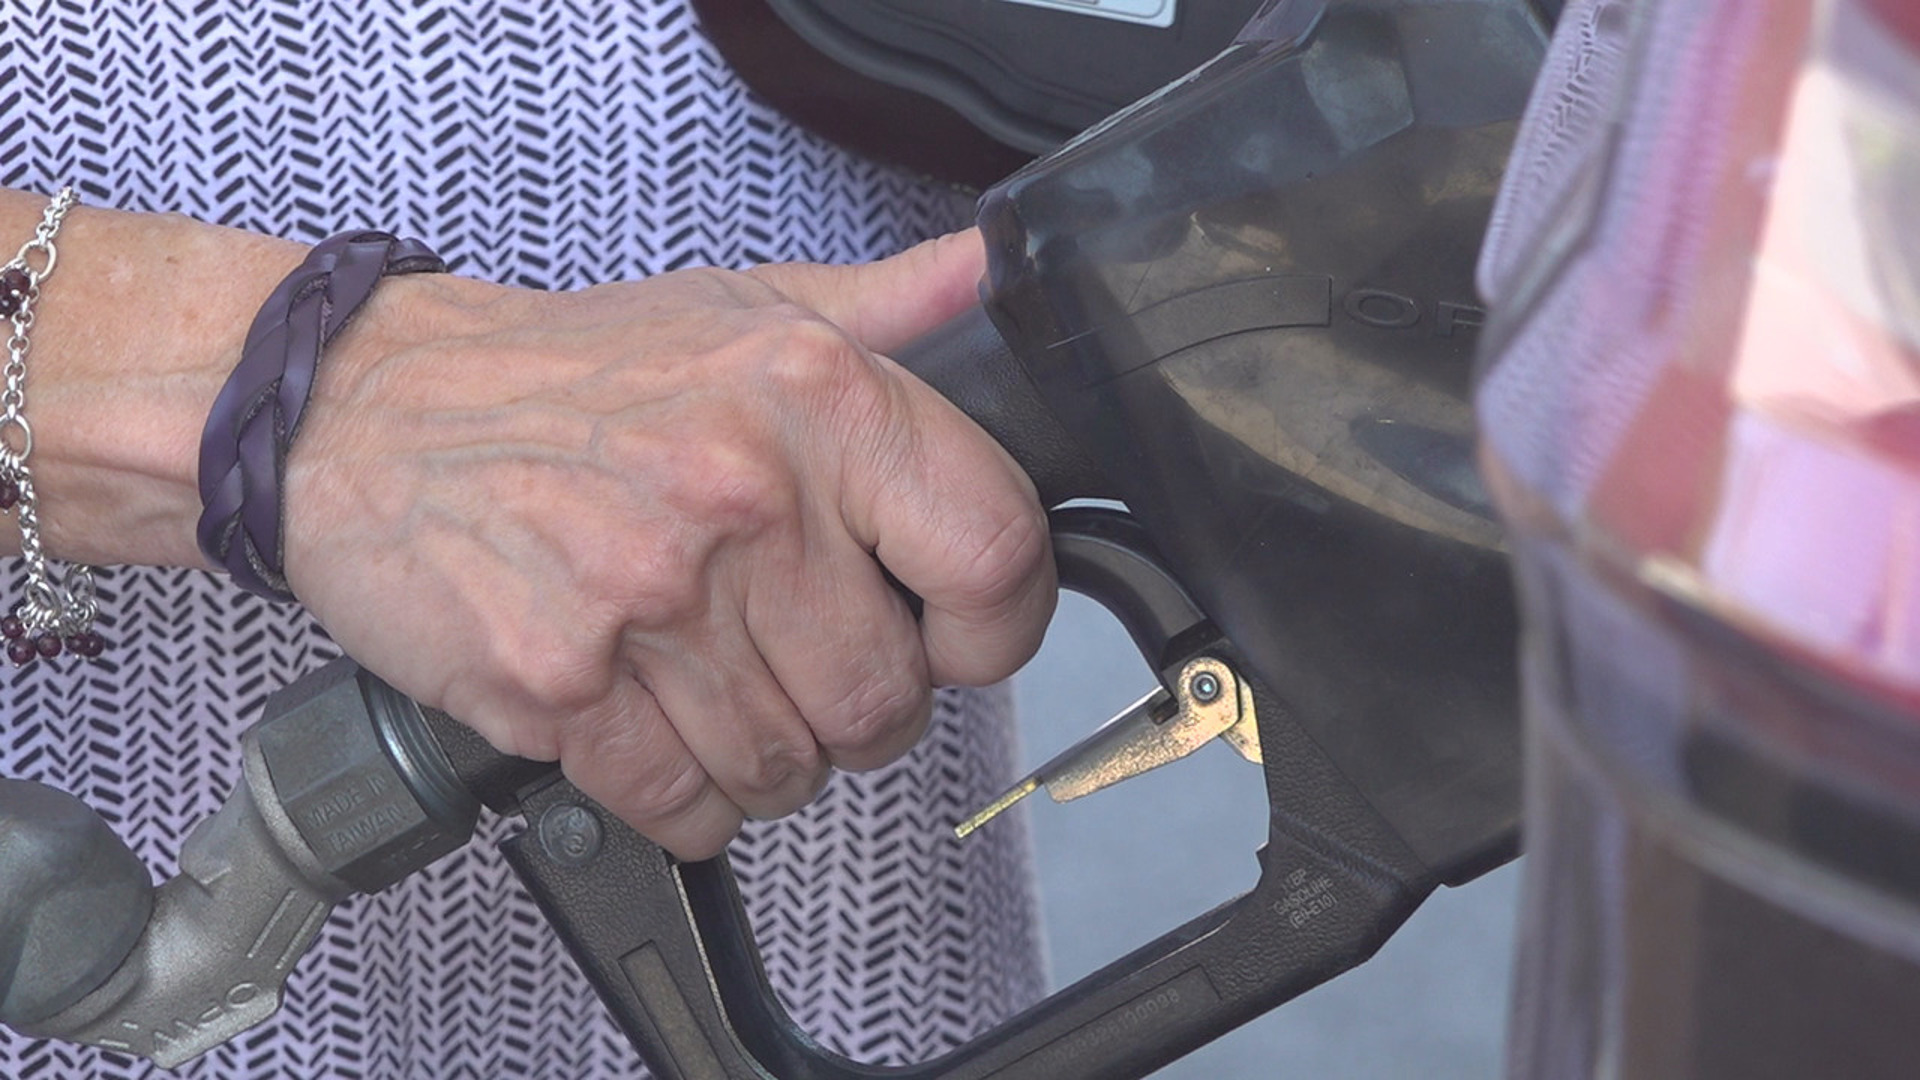 According to AAA, the average cost of gas in Pennsylvania heading into Memorial Day weekend has increased from $3.54/gallon to $3.61/gallon.